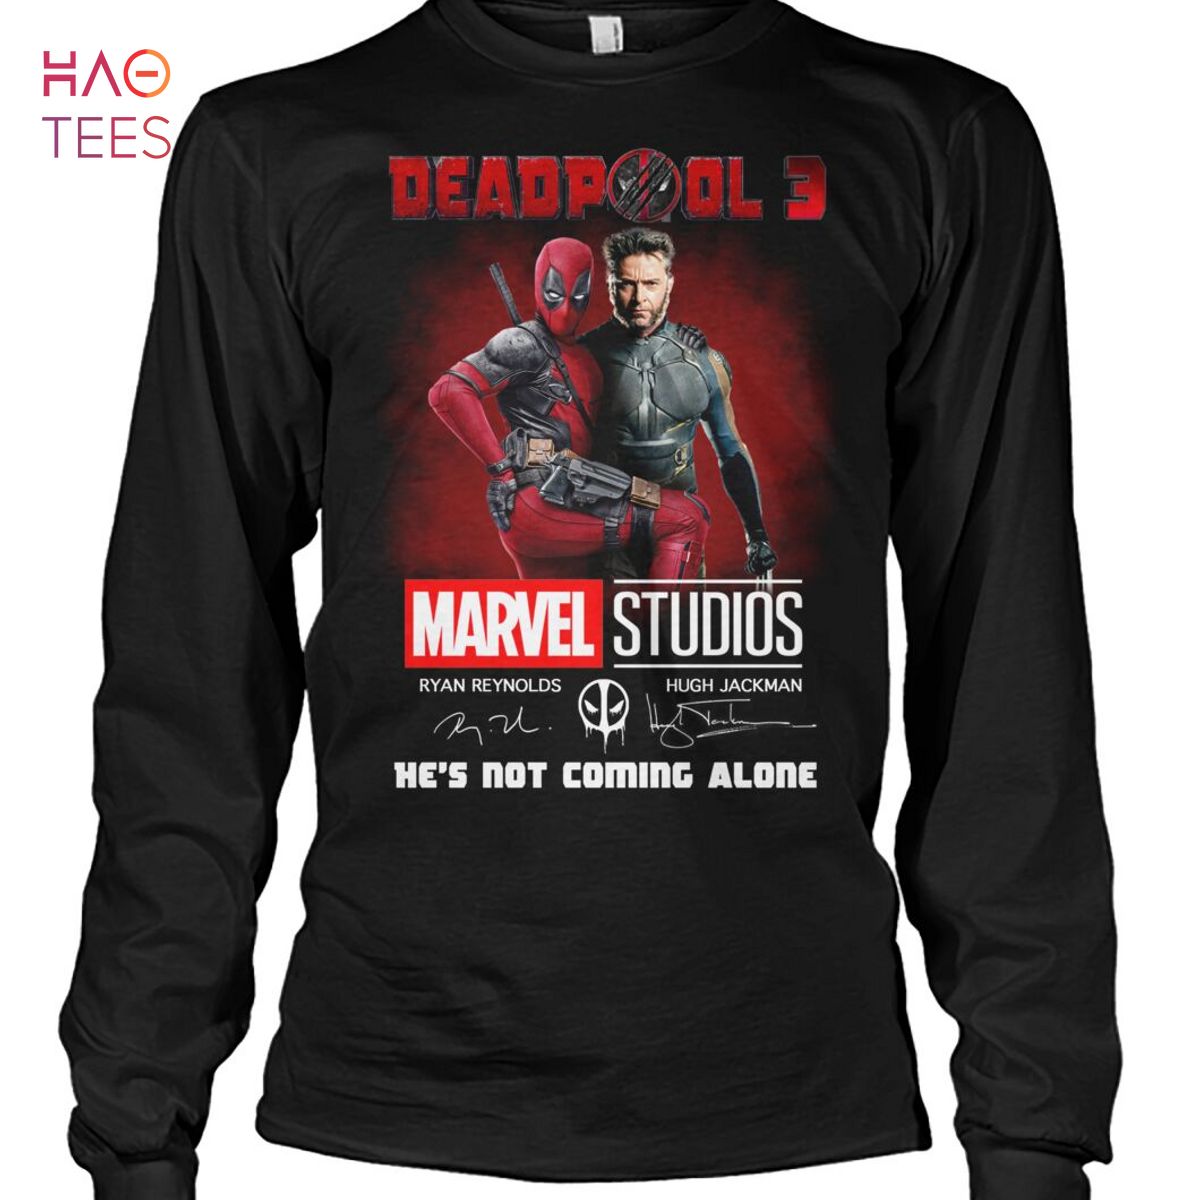 Deapool 3 Marvel Studiod He 'S Not Coming Alone Shirt